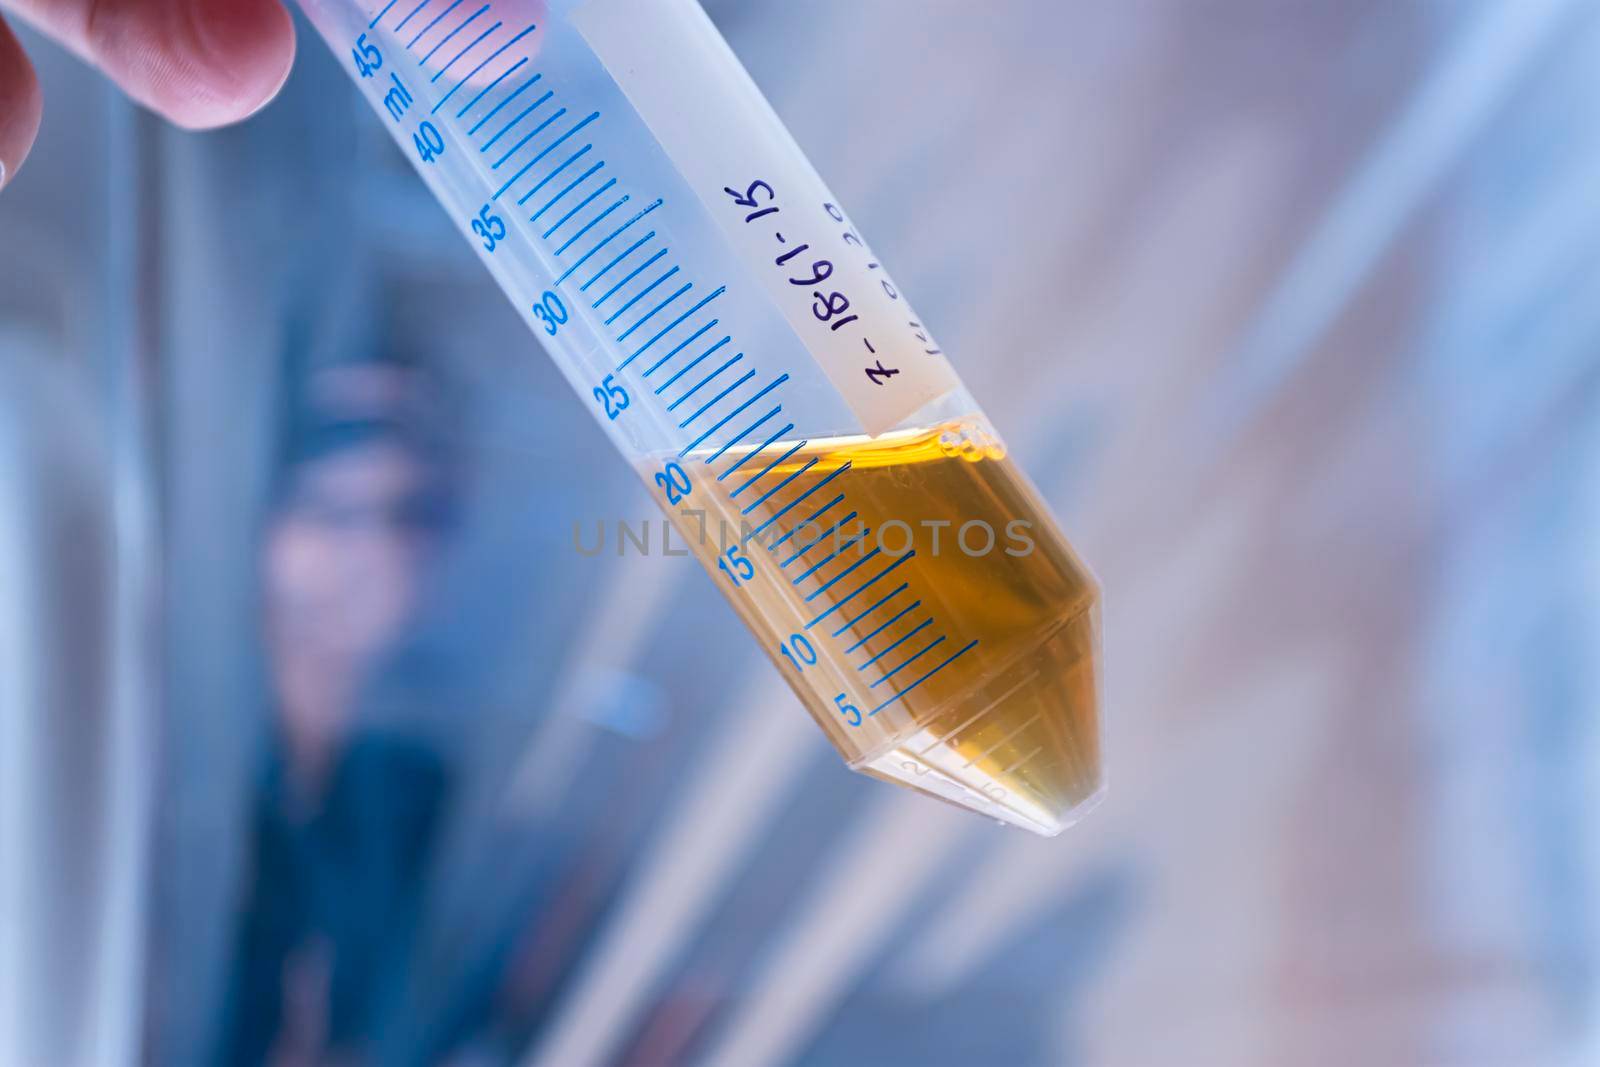 The scientist holds in his hand a transparent measuring test tube with a cloudy yellow liquid against a shiny background.